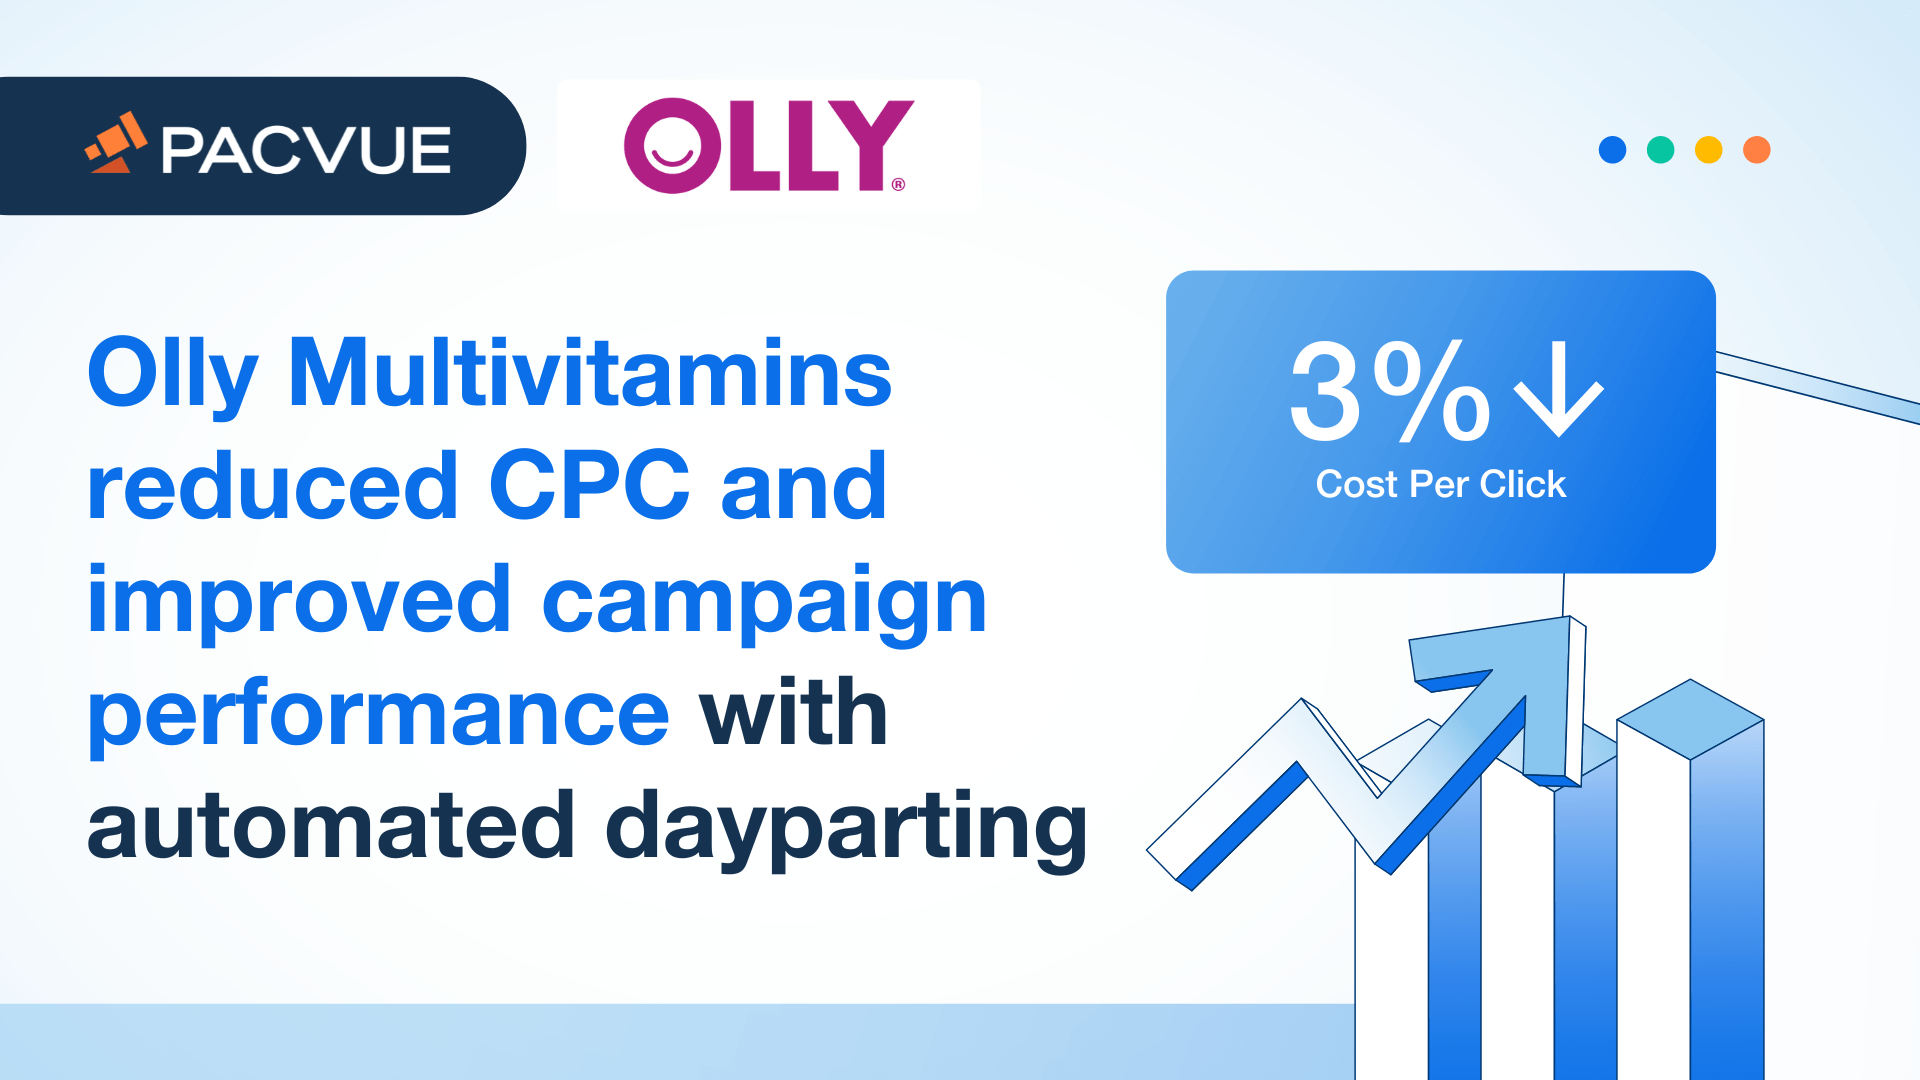 Olly Multivitamins reduced CPC and improved campaign performance with automated dayparting